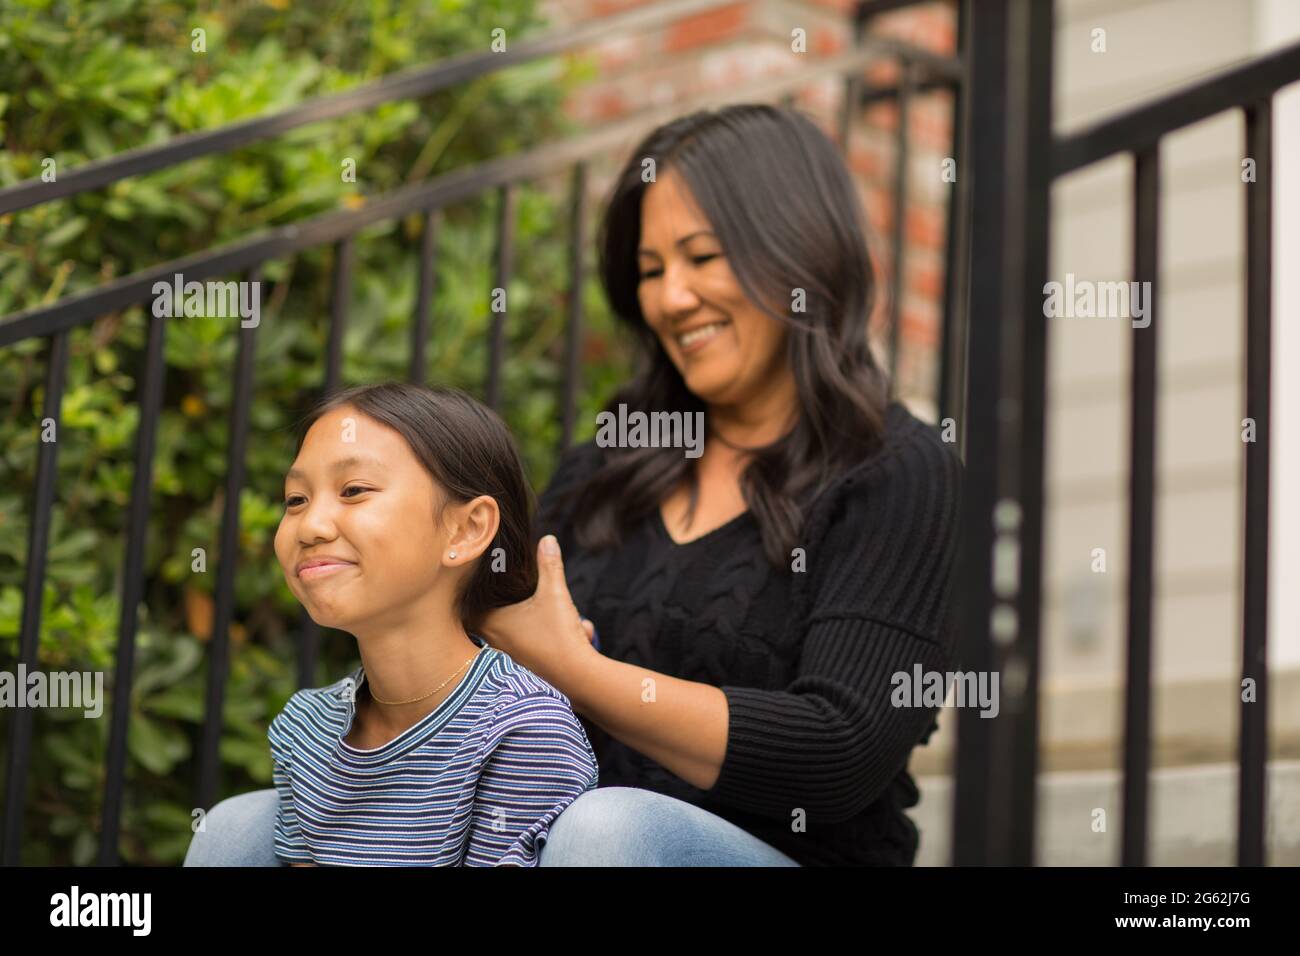 Asian mom smiling and combing her daughters hair. Stock Photo